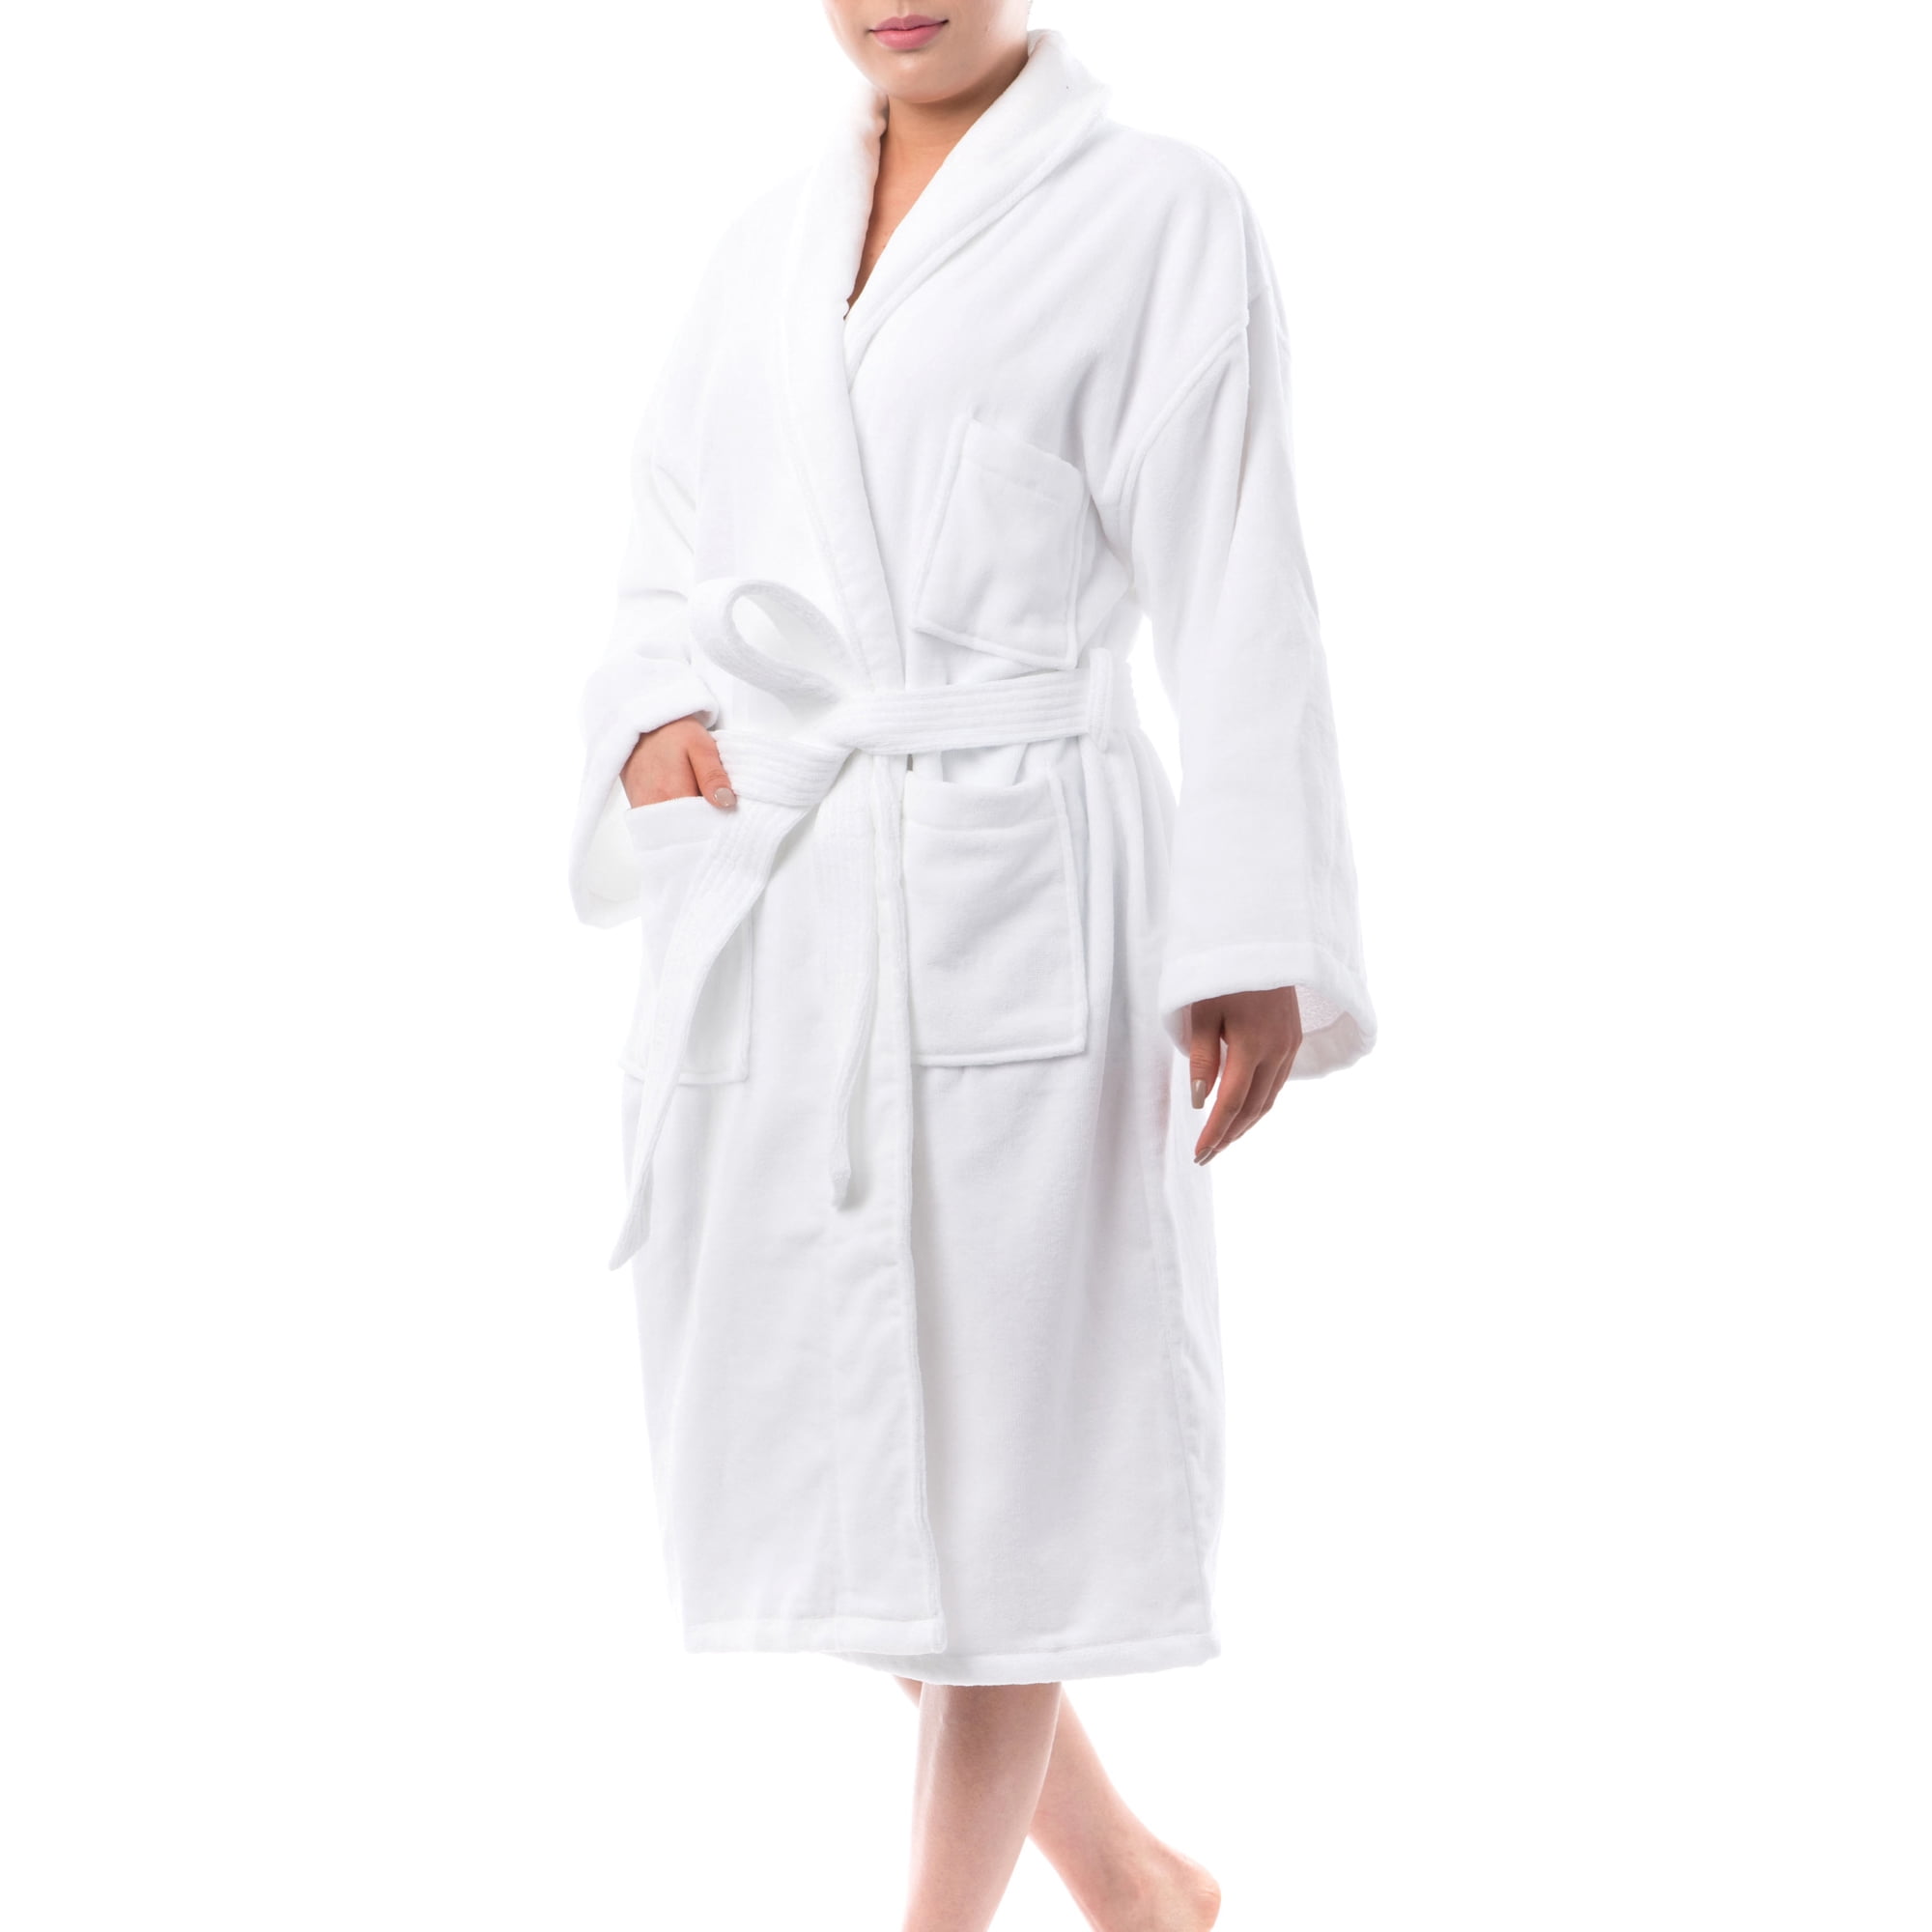 Unisex 100% Cotton Terry Towelling Shawl Collar Bath robe Dressing Gown SPA robe 